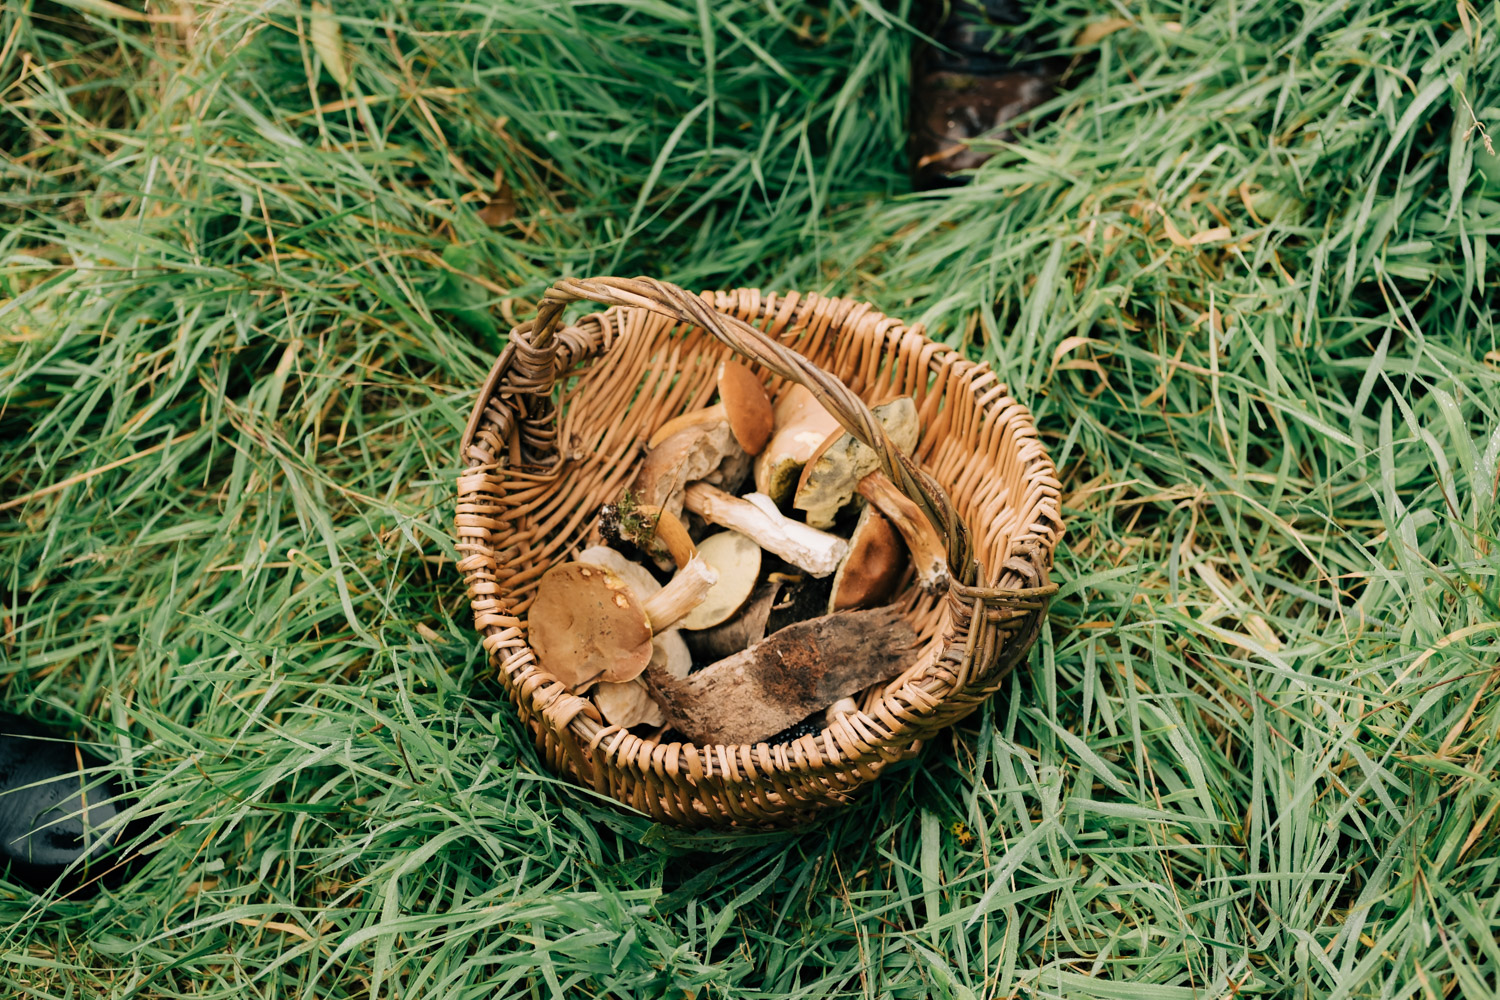 A basket sat on some grass filled with a variety of mushrooms picked from the forest.